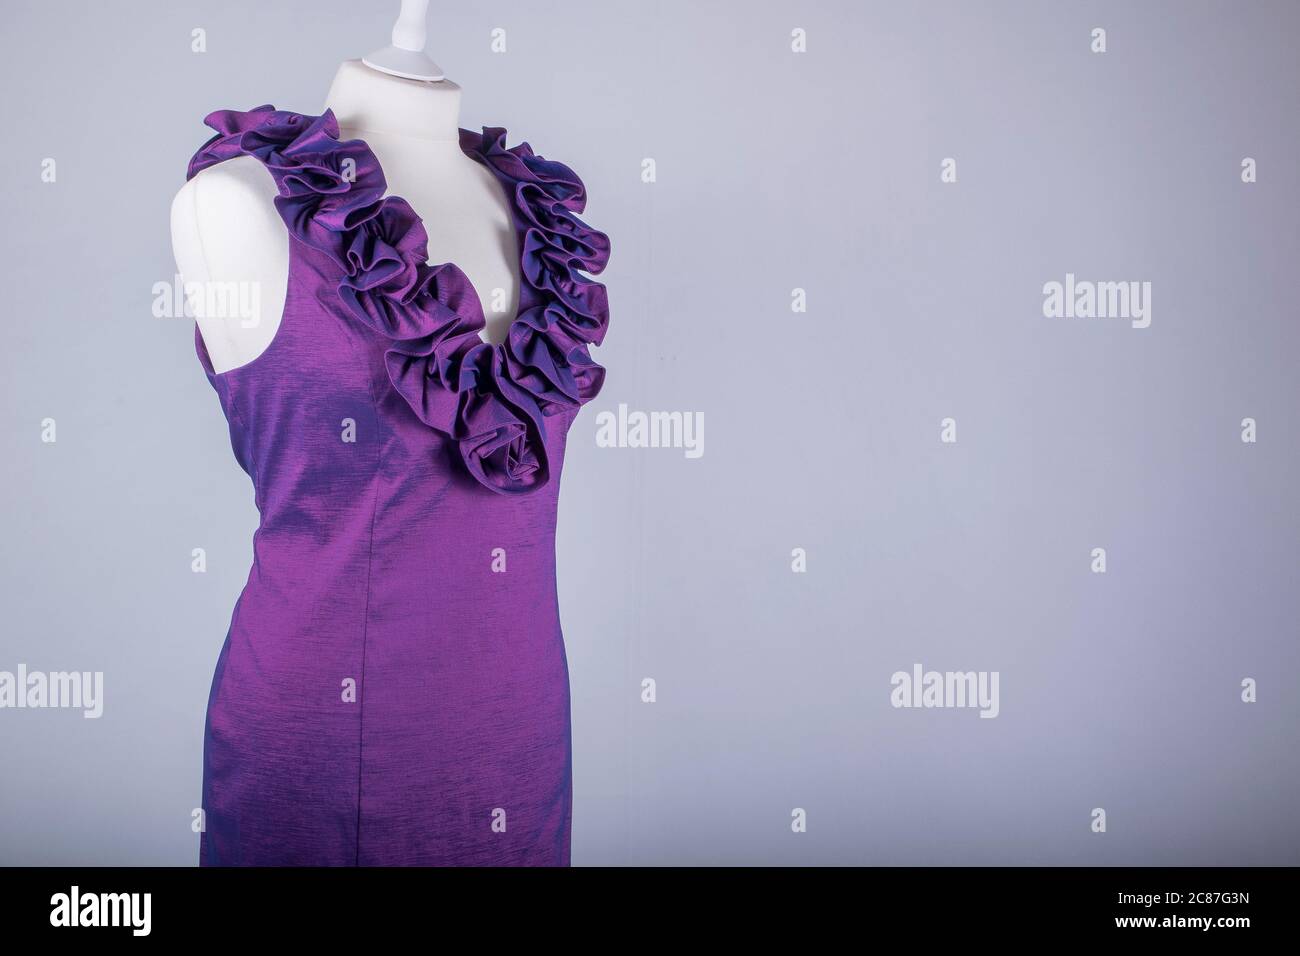 A Tailors Mannequin dressed in a Purple Ruffle Dress Stock Photo